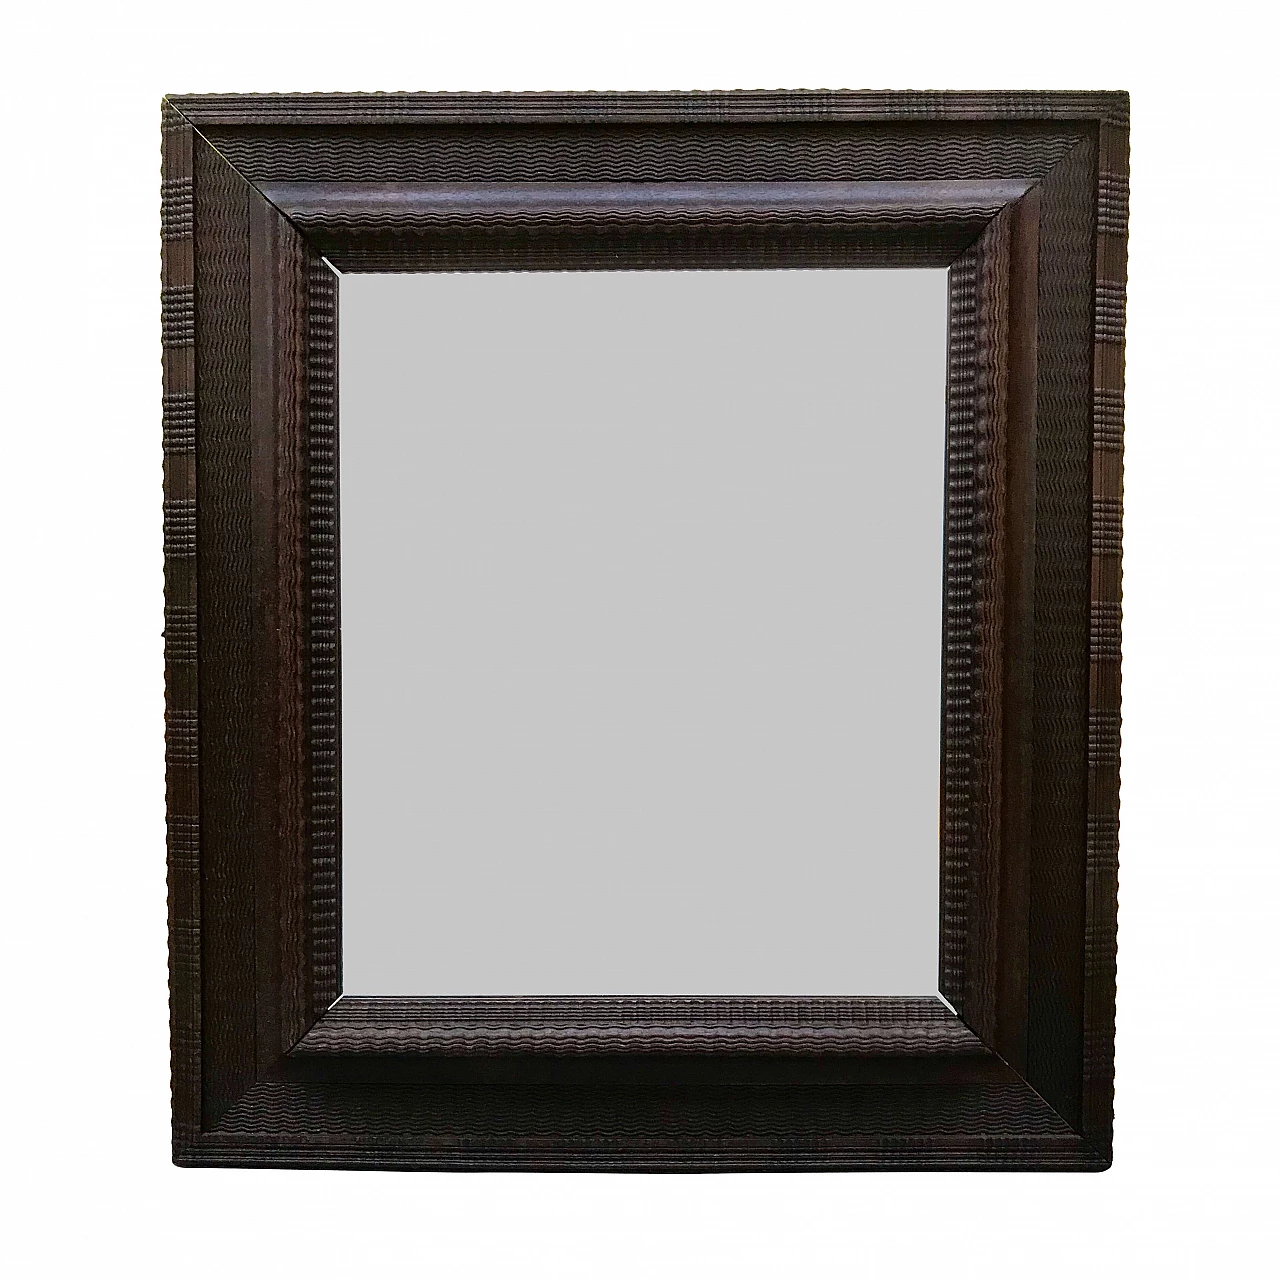 Guillochè frame in oak with mirror, early 800's 1170871